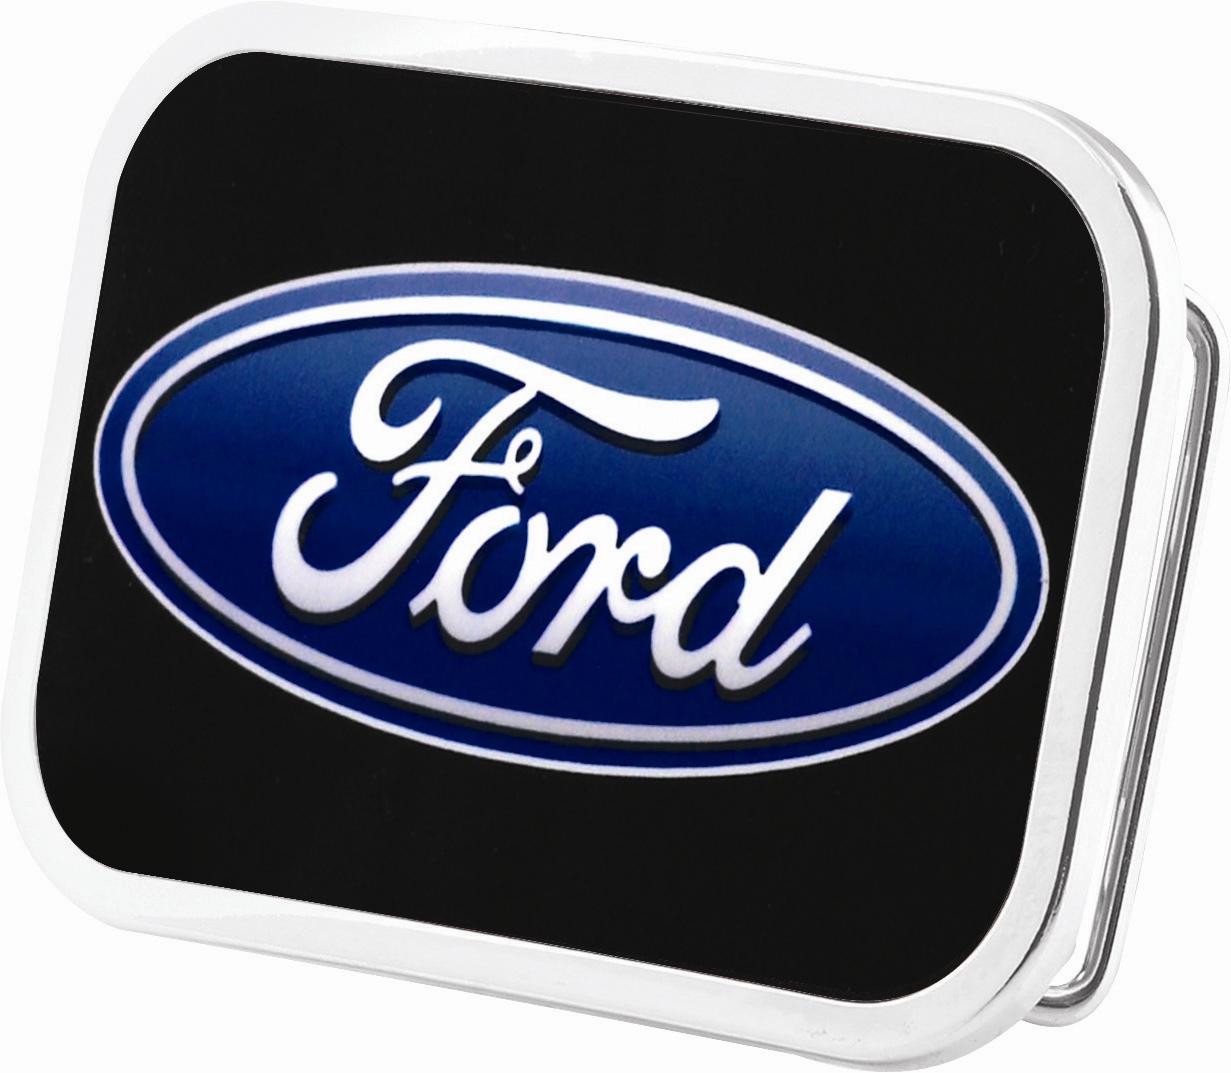 Download Ford Logo Wallpaper Wallpaper For your